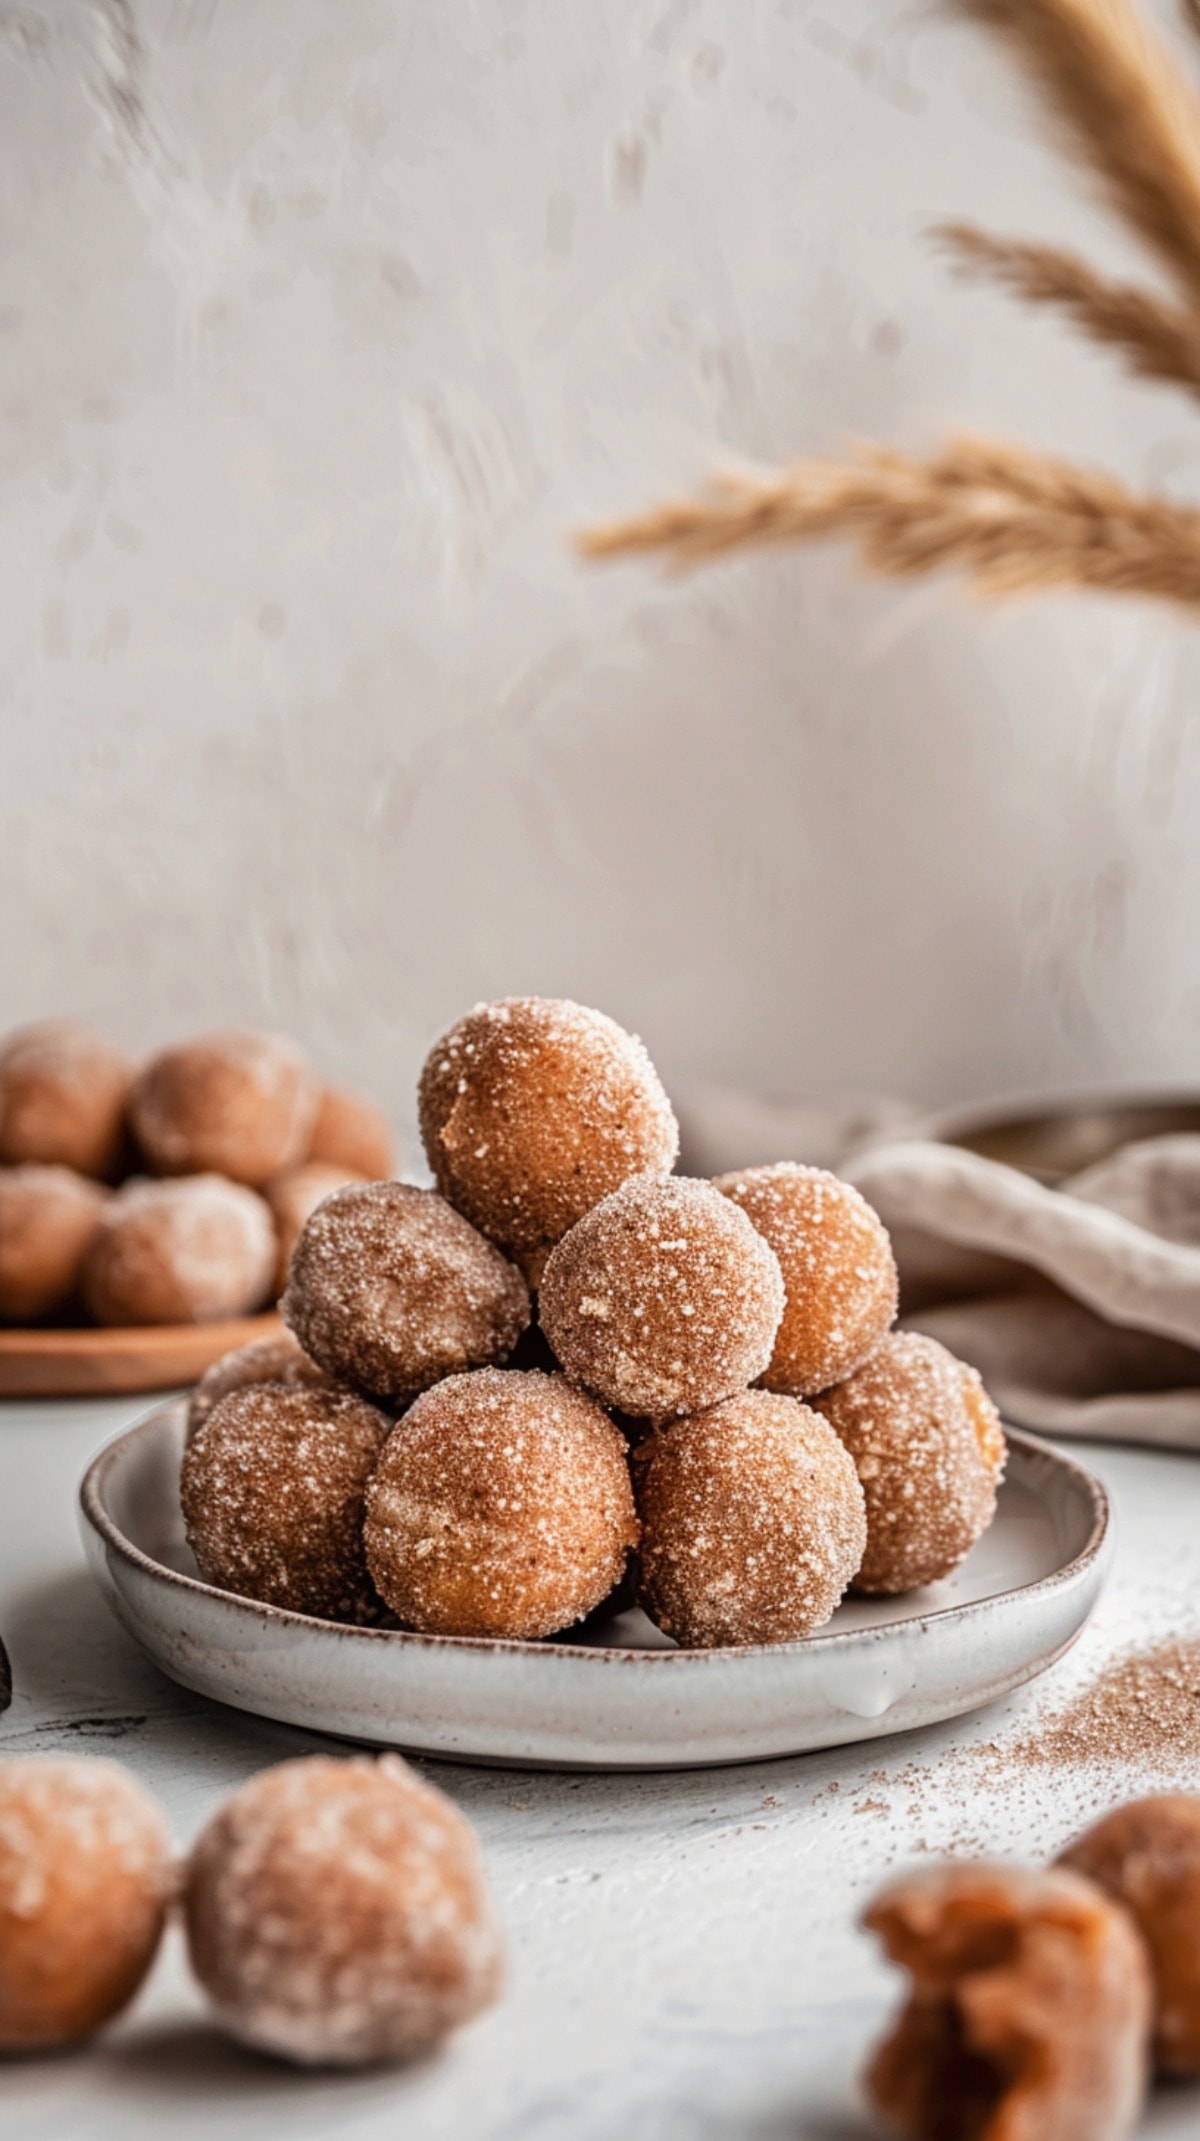 Homemade Donut Holes with cinnamon sugar on a plate